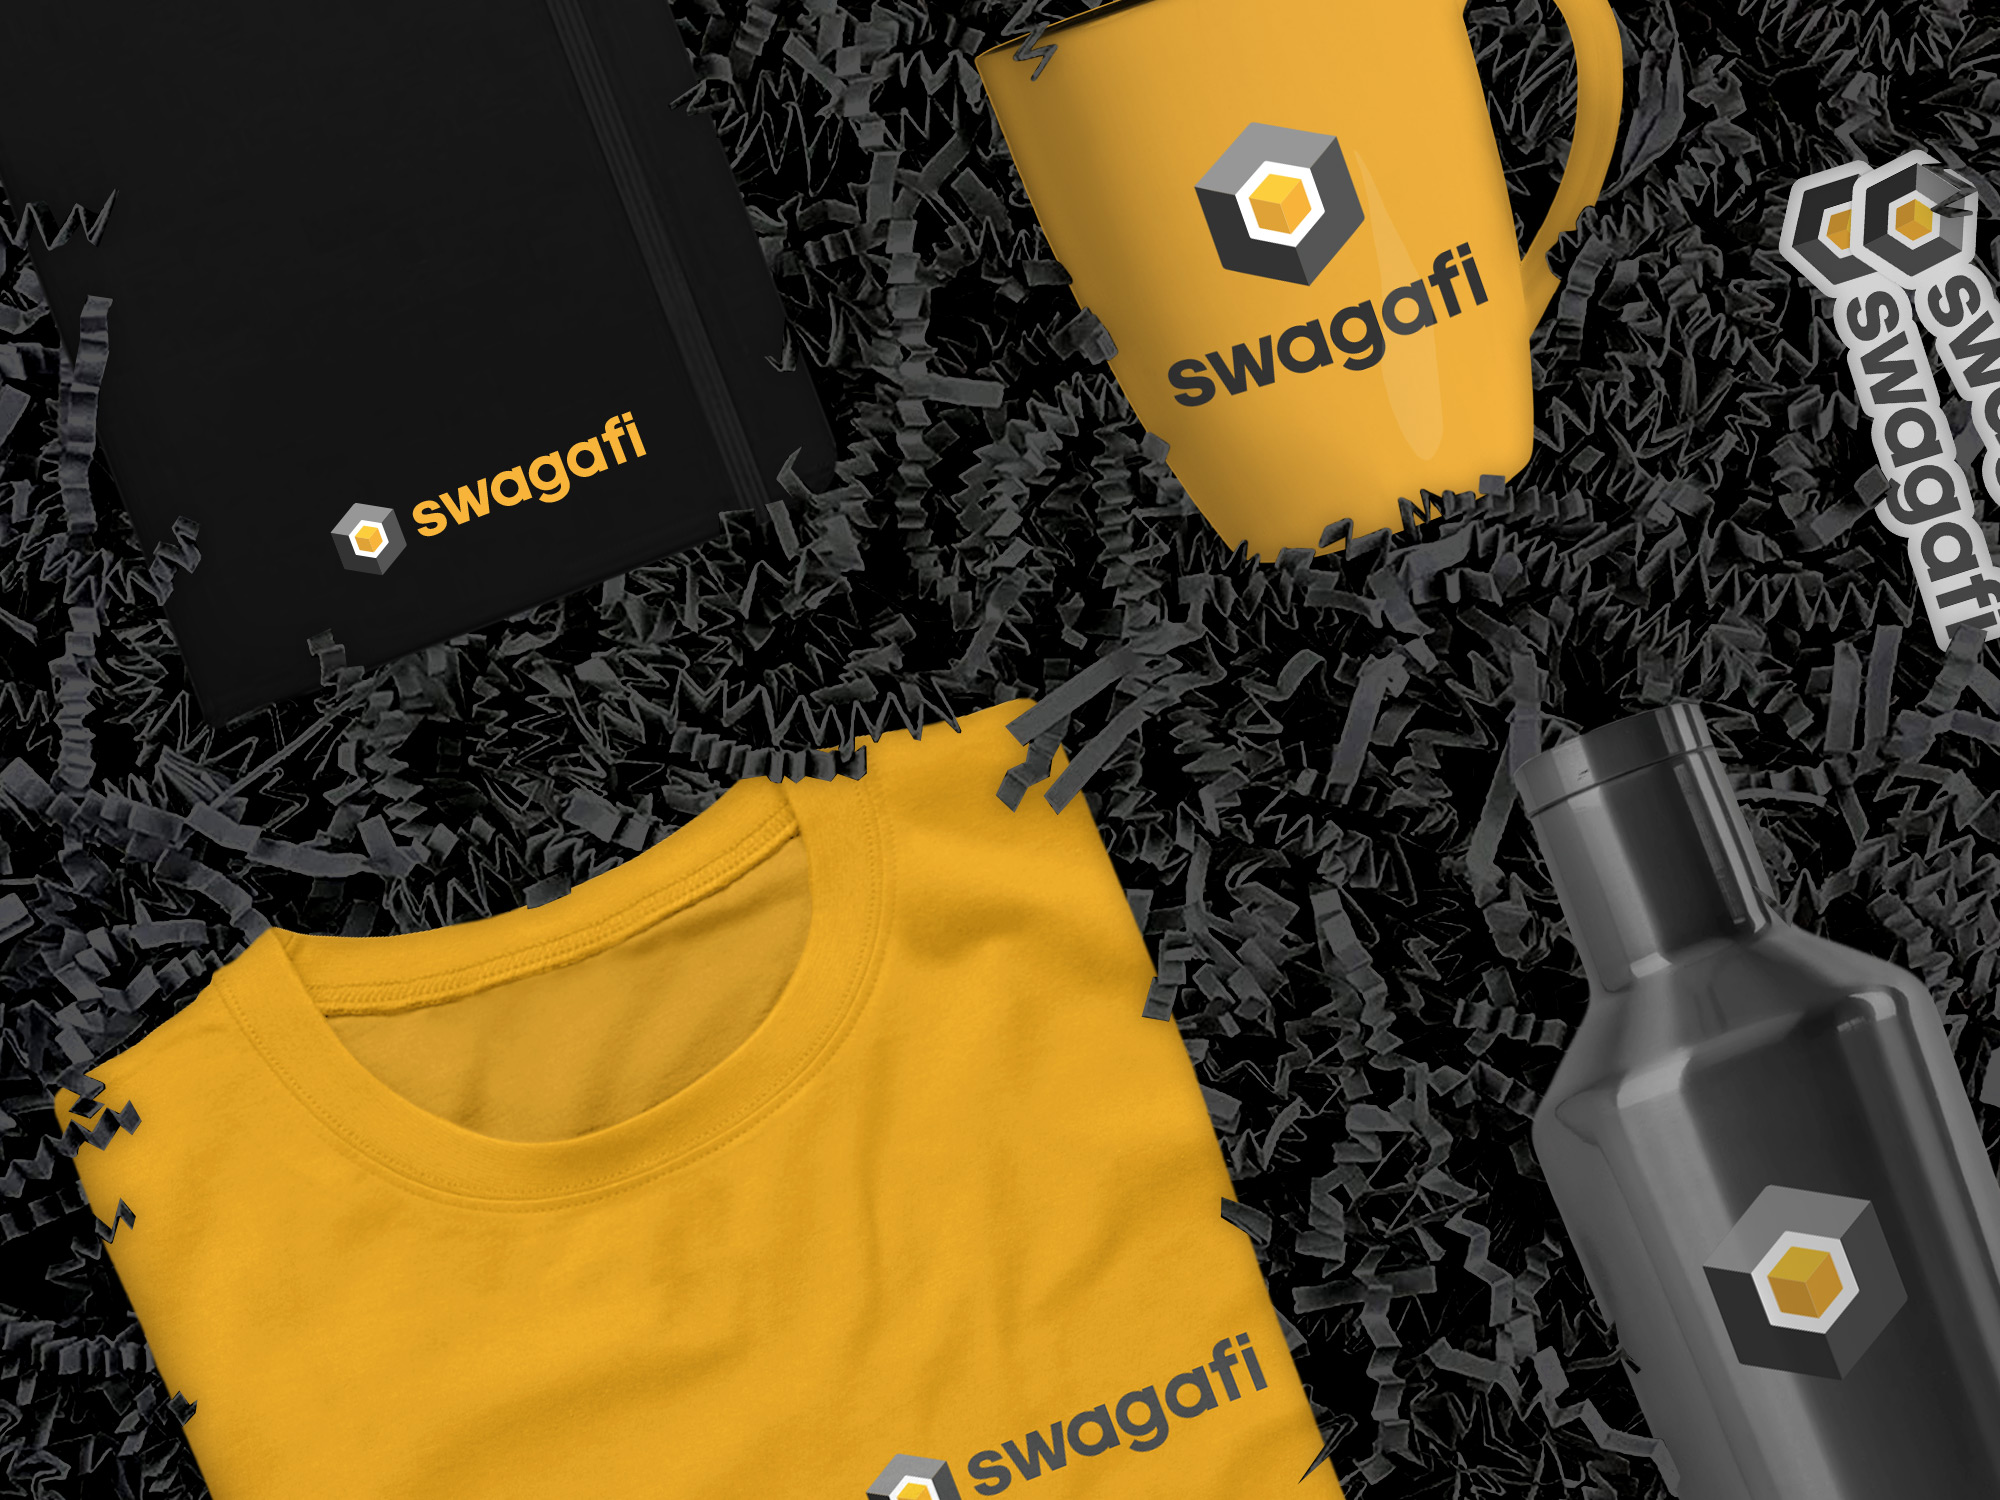 Swagafi Products in the box